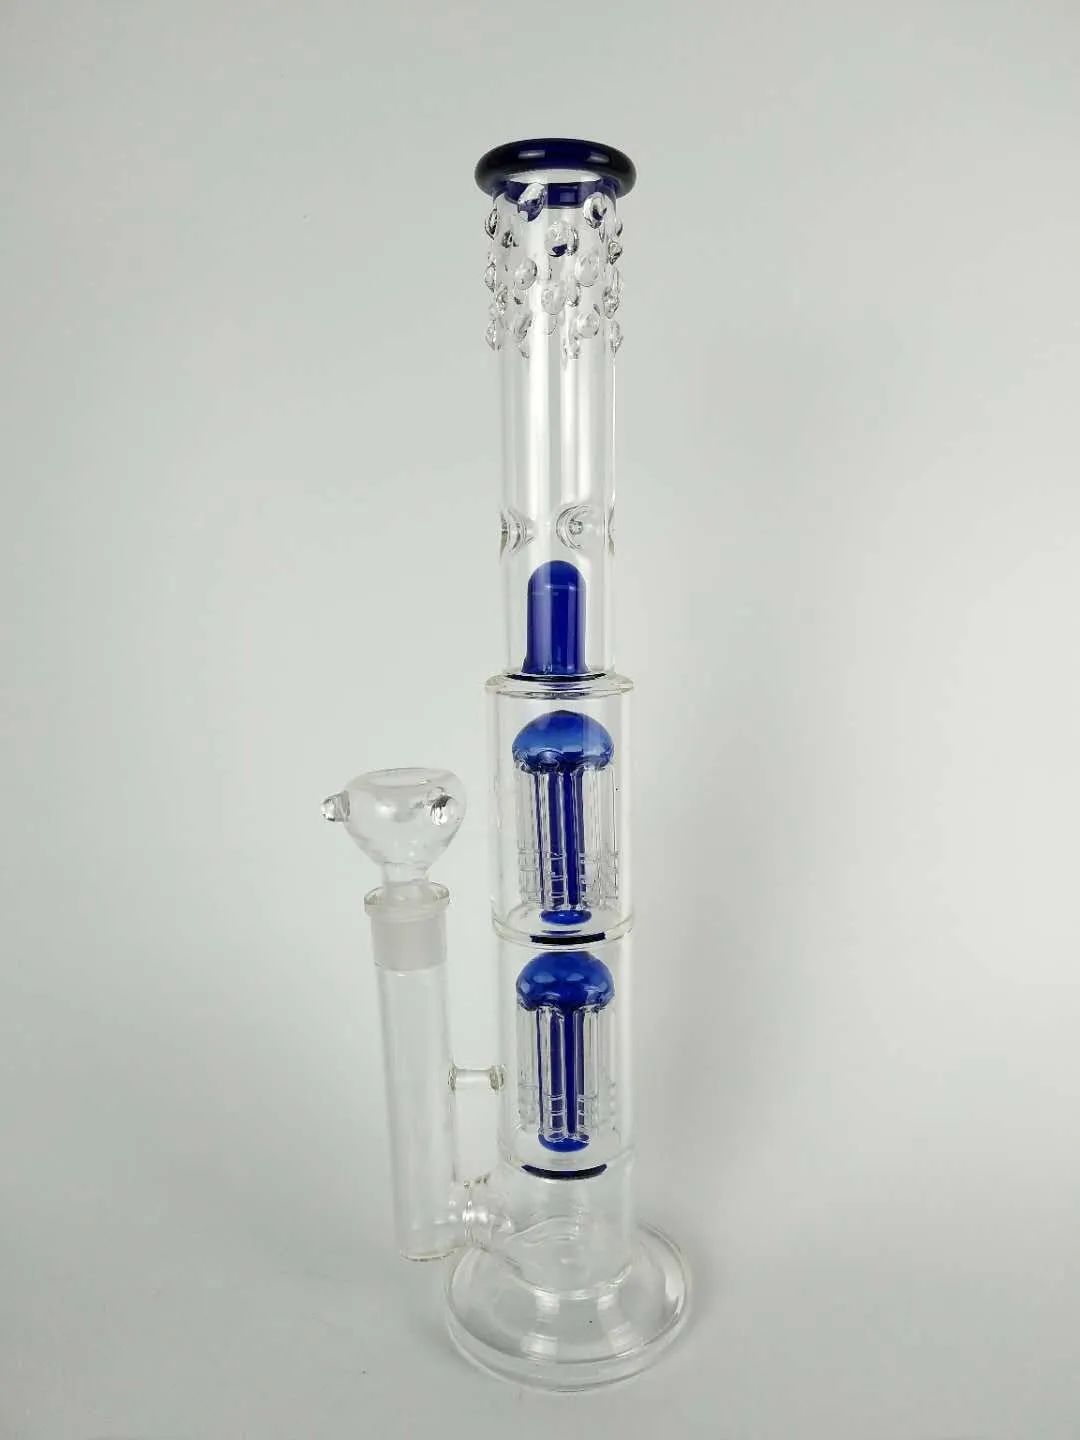 H 16quot Glass Bong QuotSpoiled Greenblue Speranzaquot Double Tree Perc Dome Percolator Water Pipe 18mm skål Big Water Pip6173588